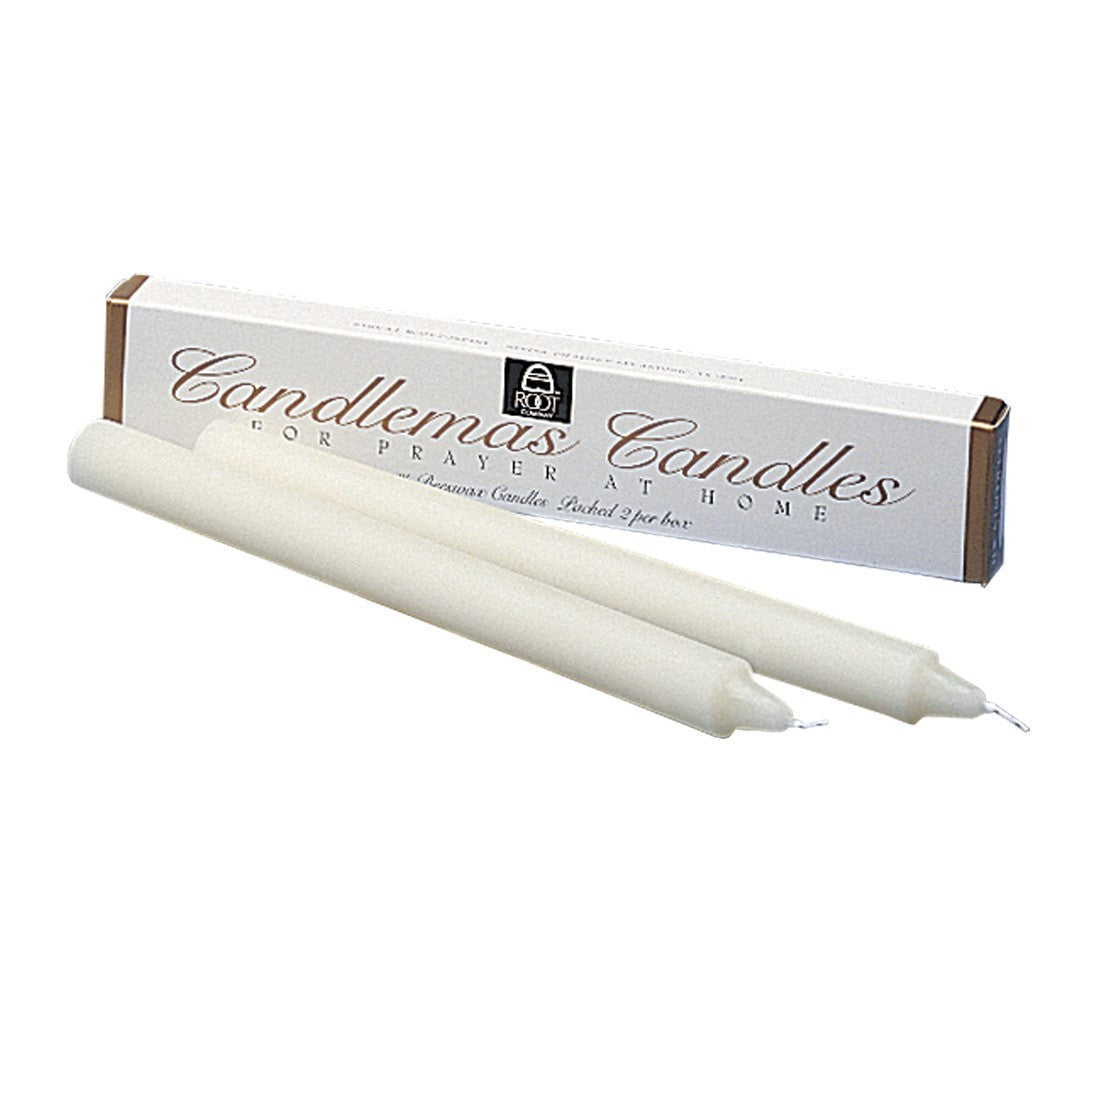 Home/Candlemas Candles